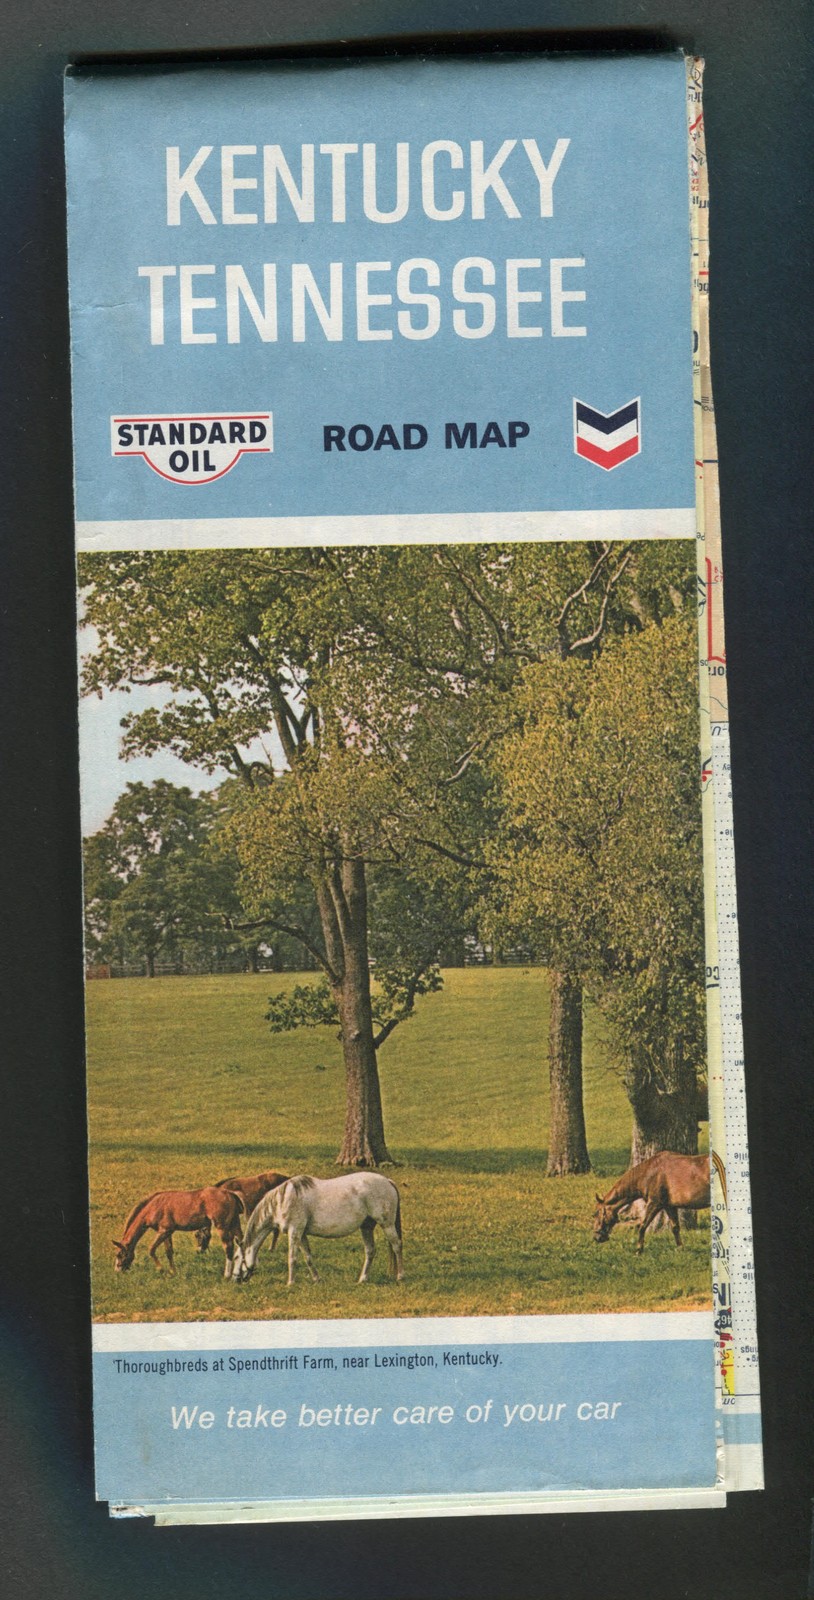 Primary image for 1967 Kentucky Tennesse Road Map by Standard Oil